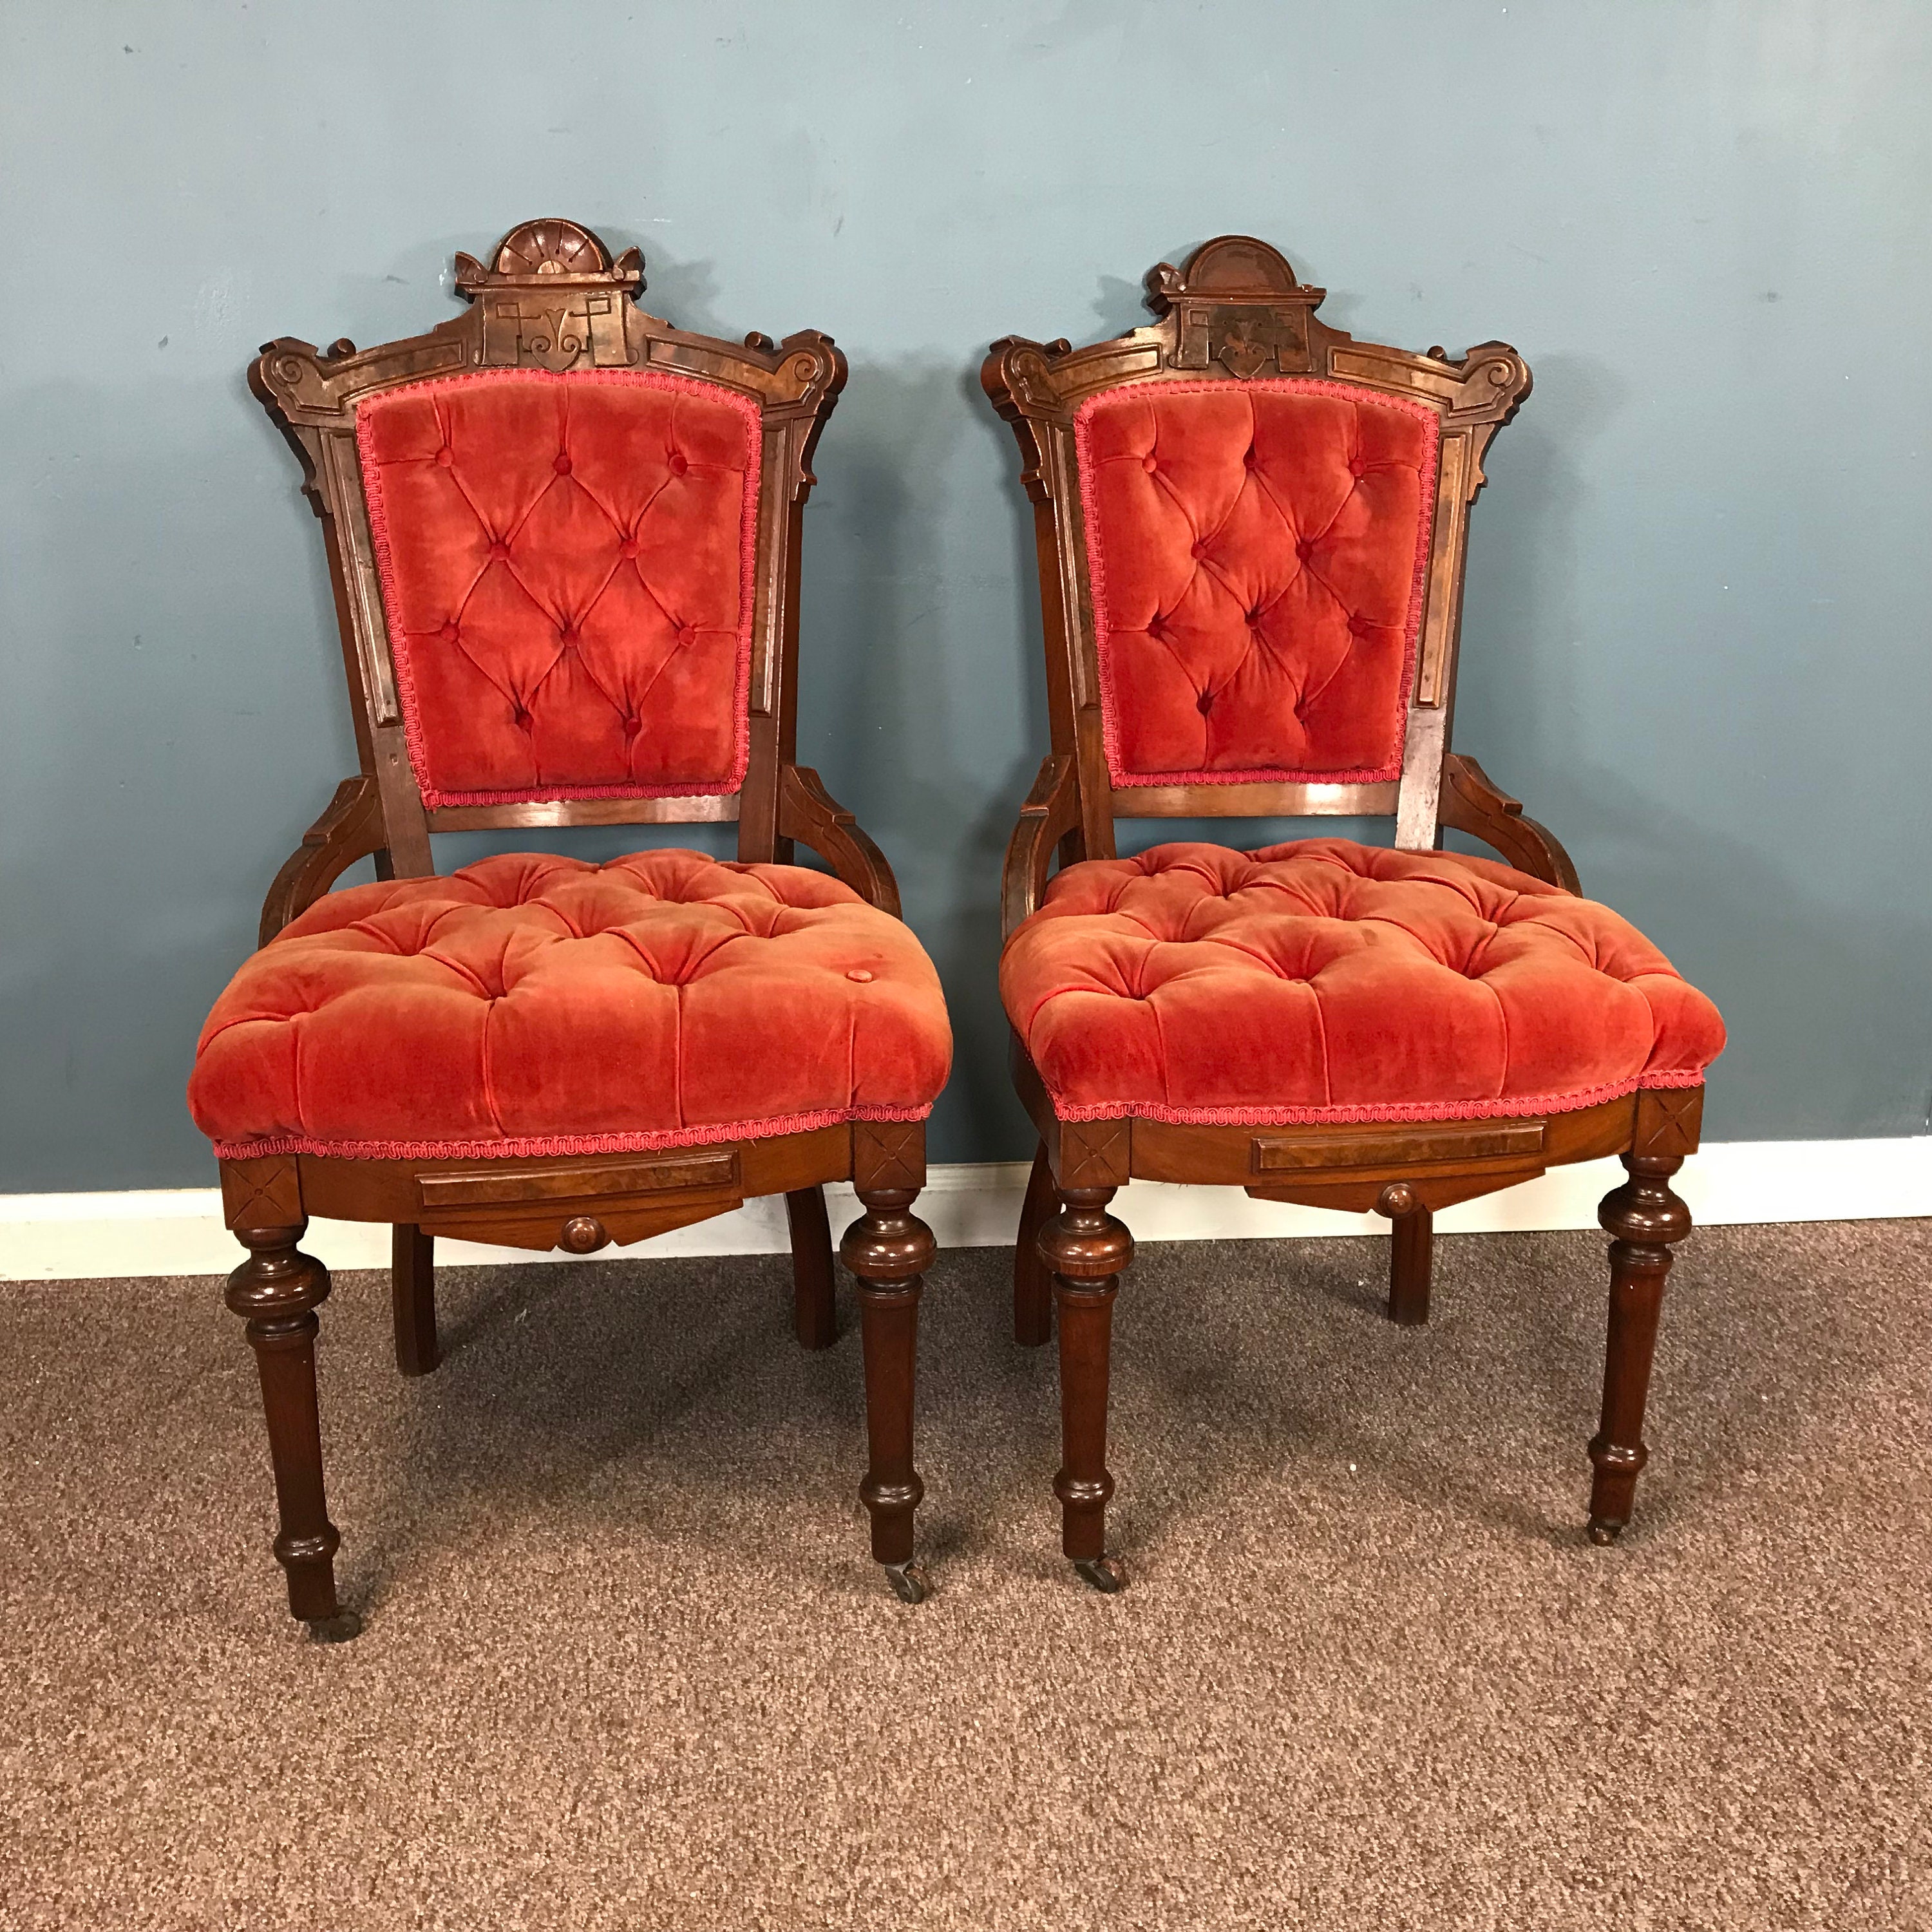 Pair of French Antique Carved Chairs Original Horsehair